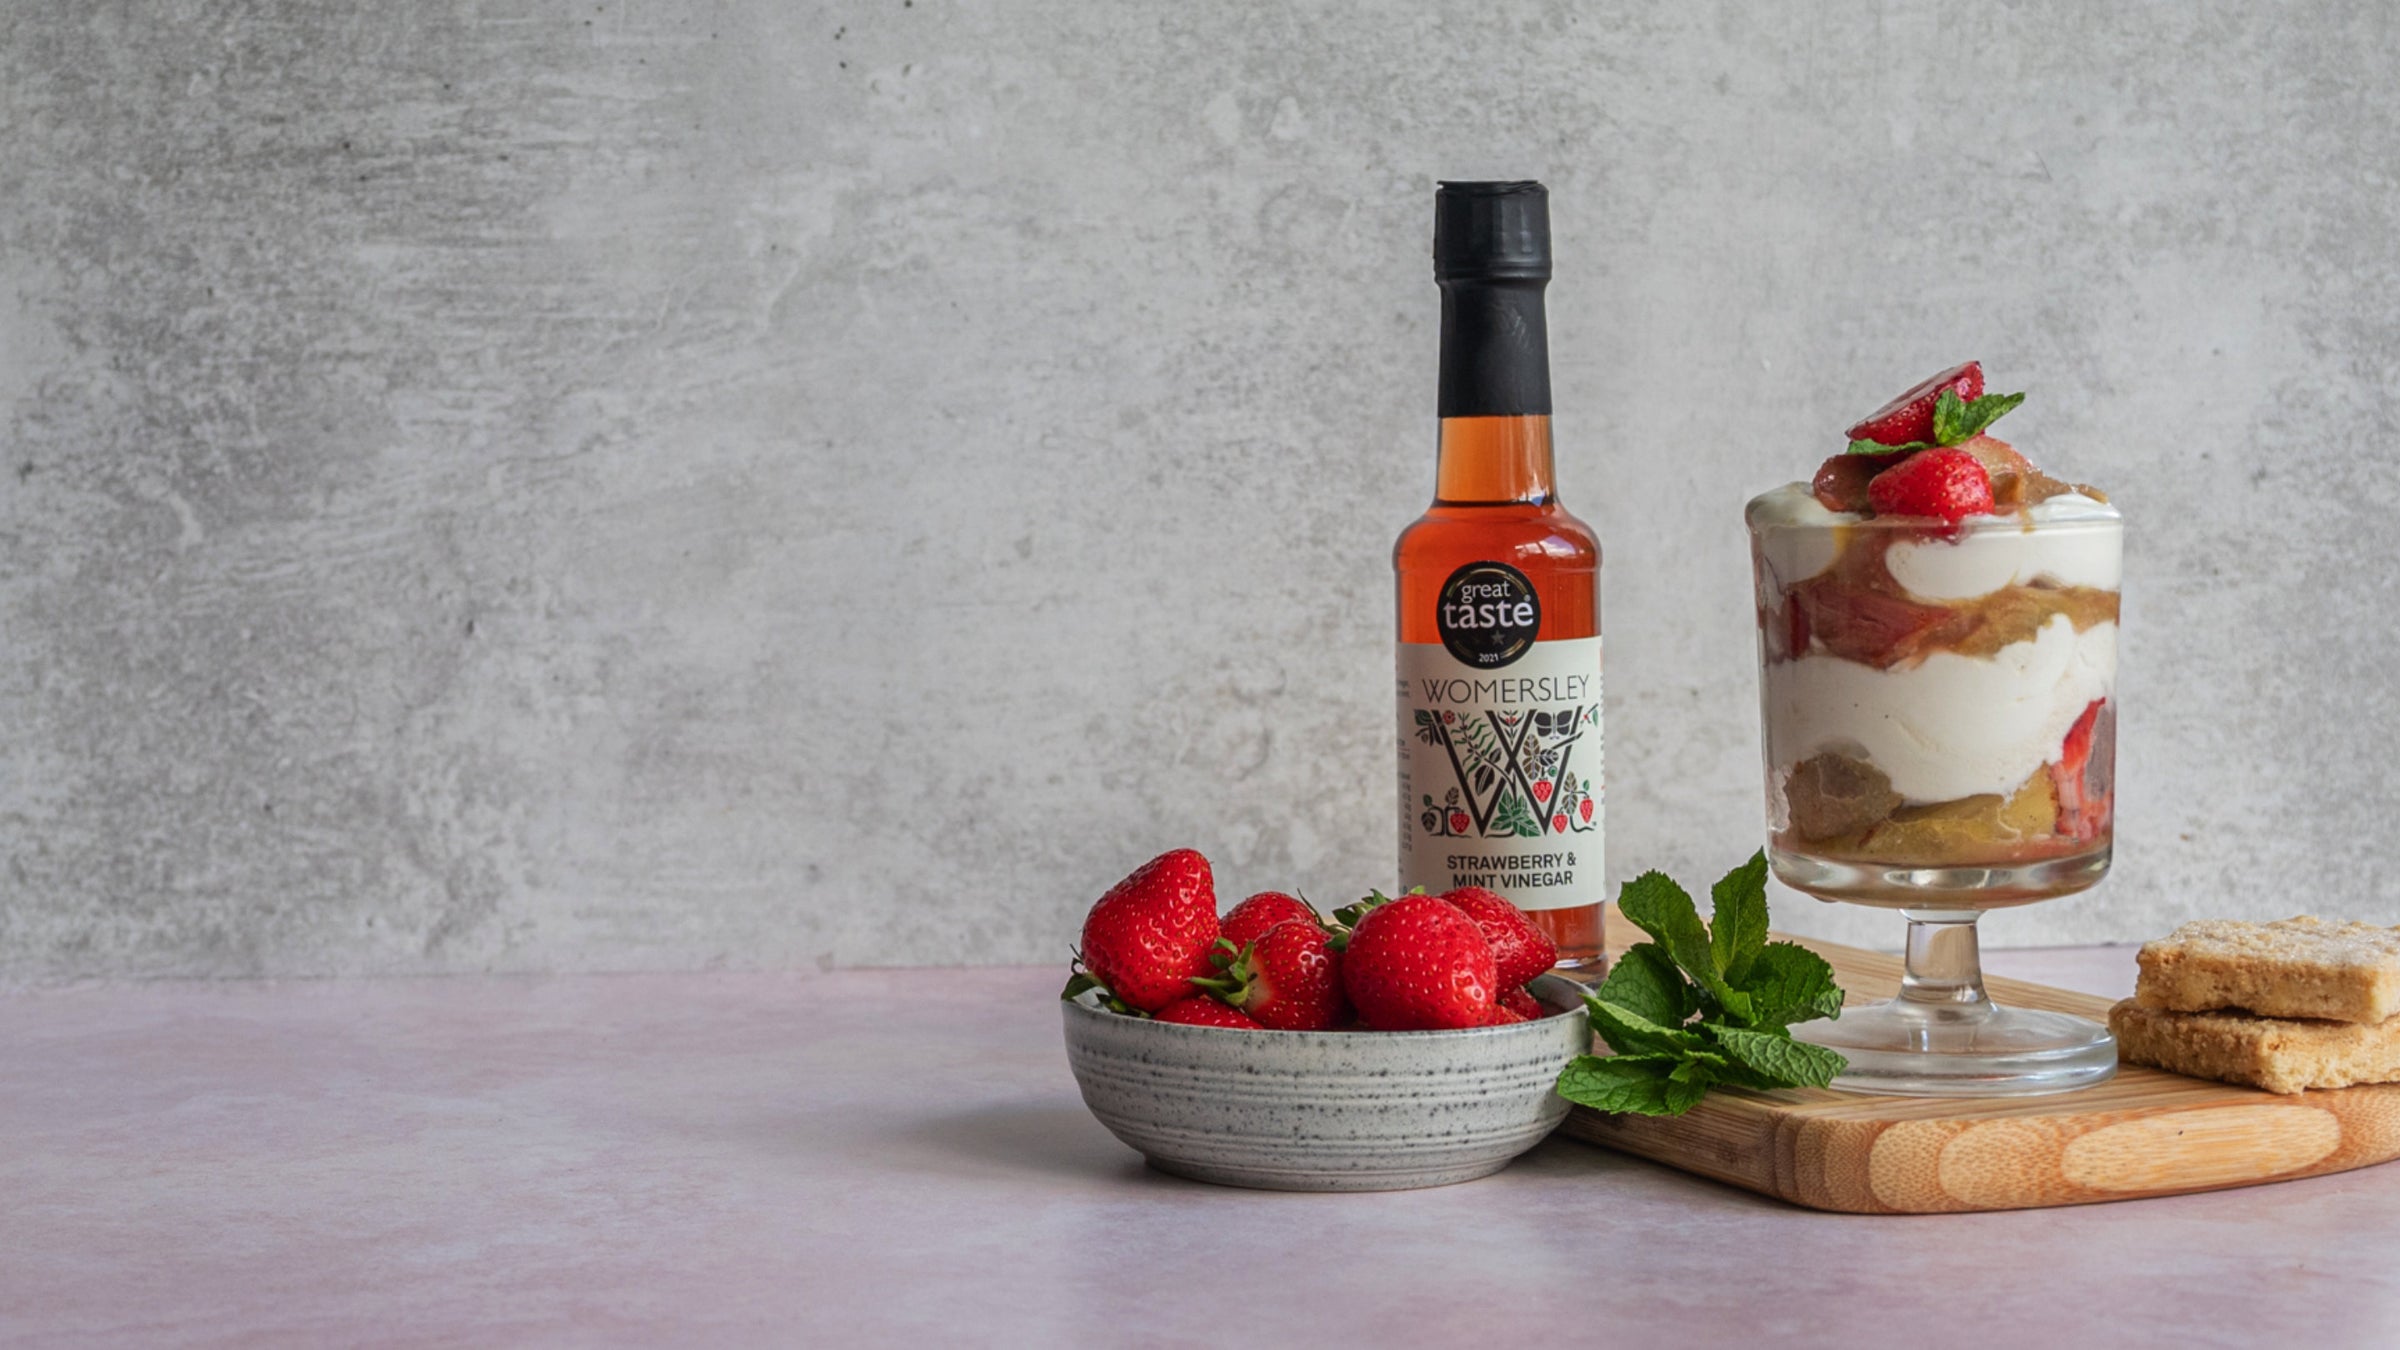 Womersley Foods Strawberry & Mint Vinegar bottle used to make strawberry ice cream in an ice cream cup with a bowl of strawberry, mint leaf and bread on a cutting board.